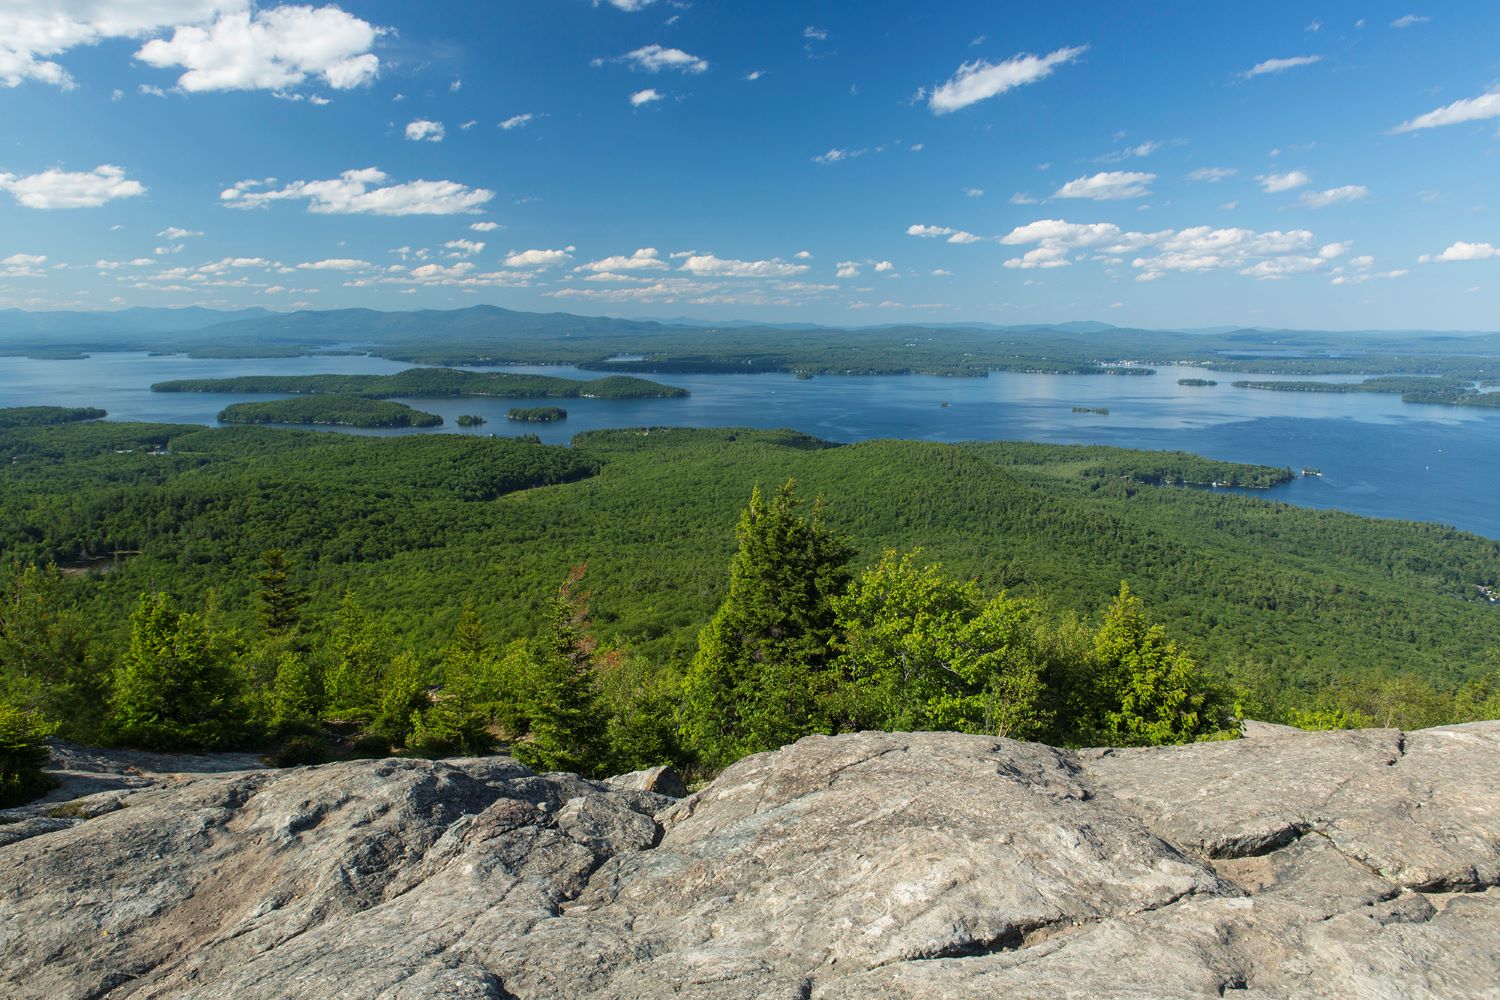 Mt Major's summit offers stunning views of the lake.